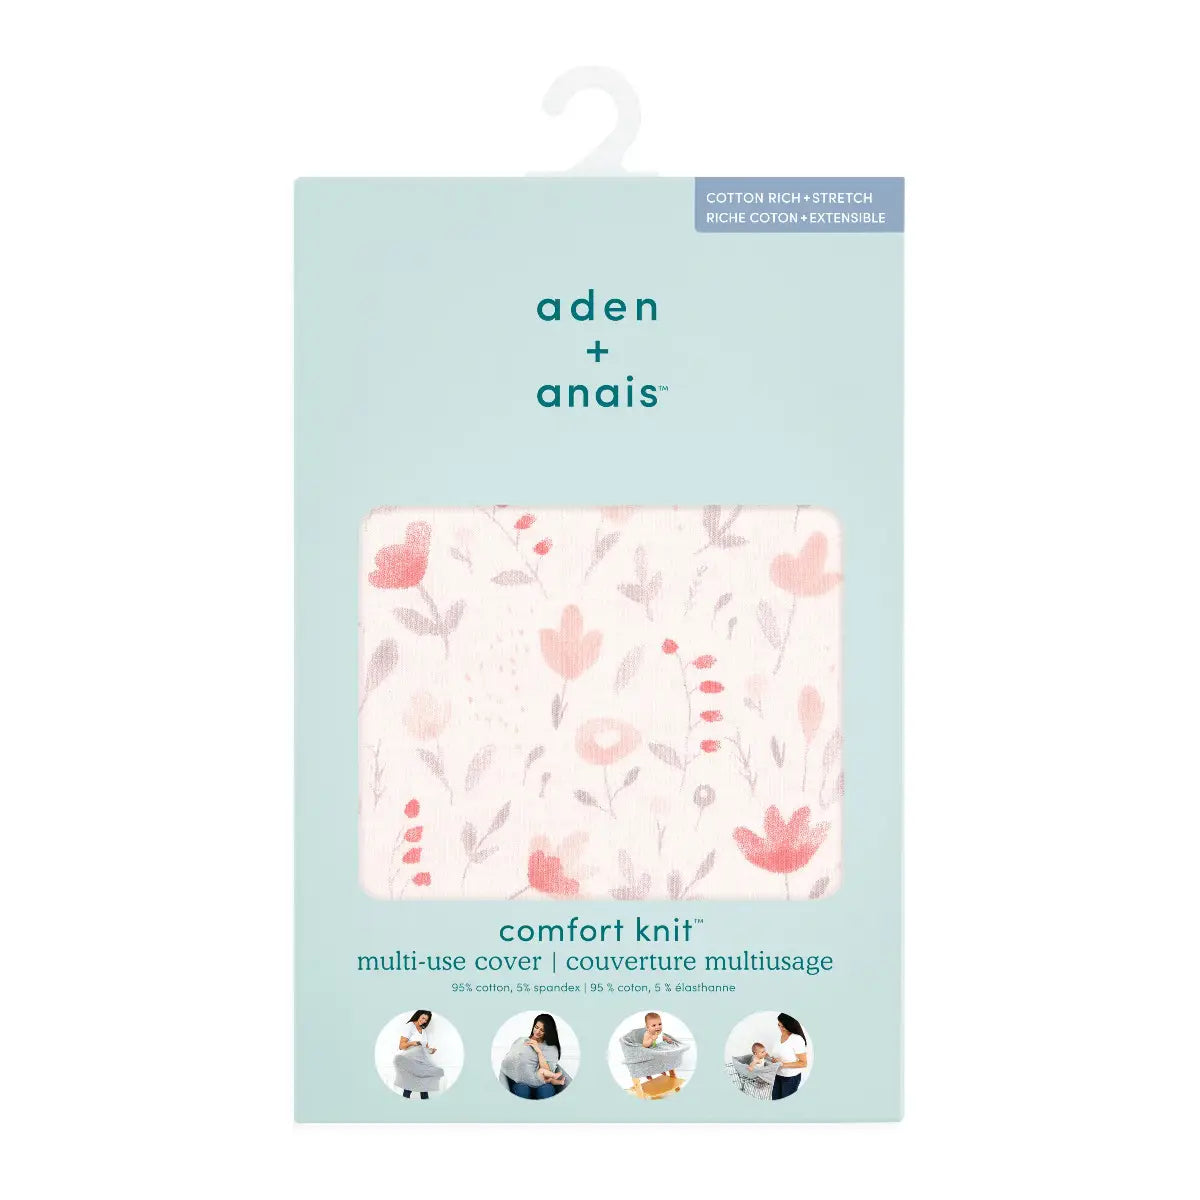 Aden and Anais comfort knit multi-use cover perennial